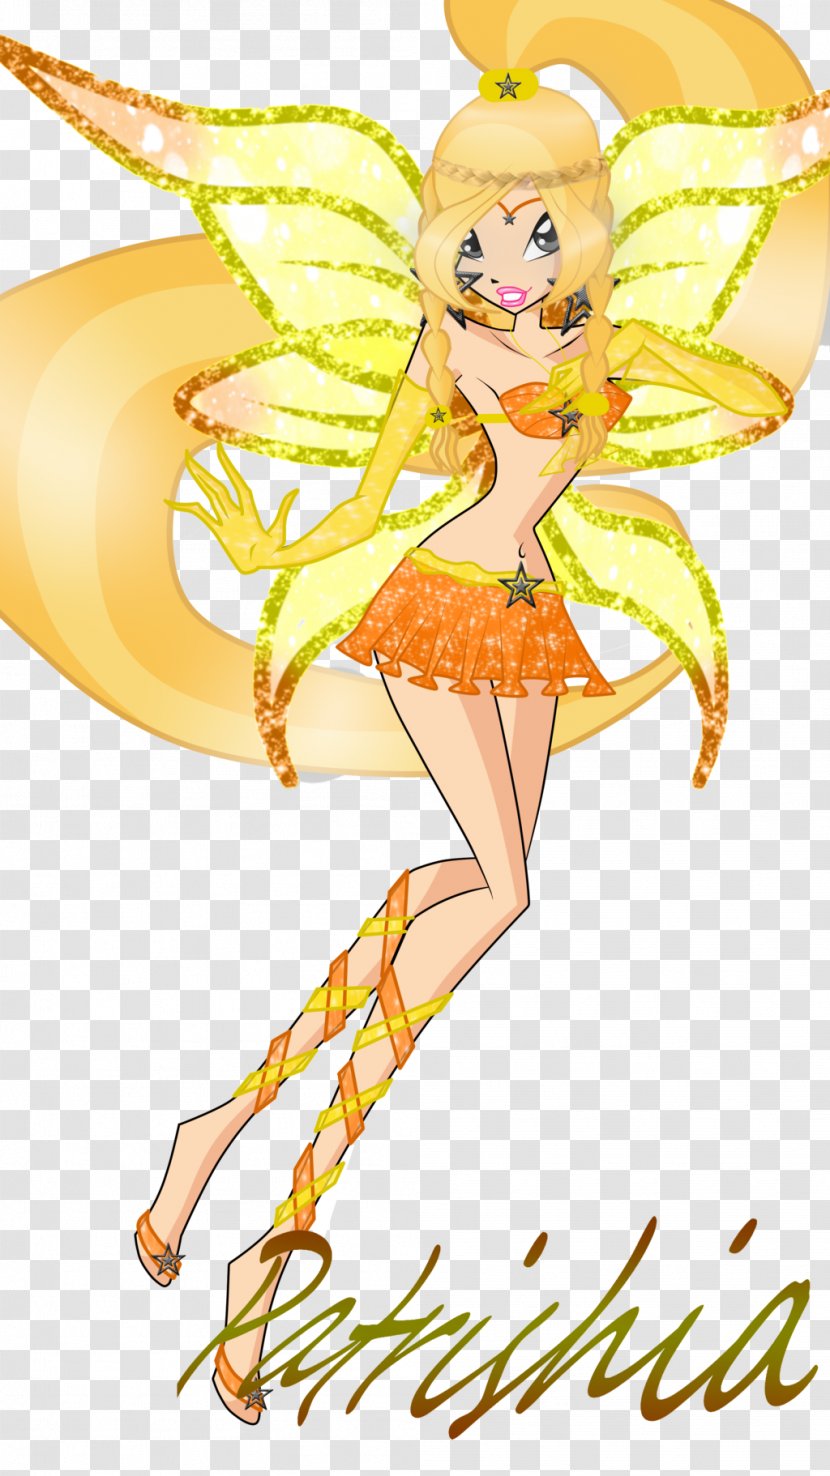 Fairy Costume Design Insect Clip Art - Flower Transparent PNG